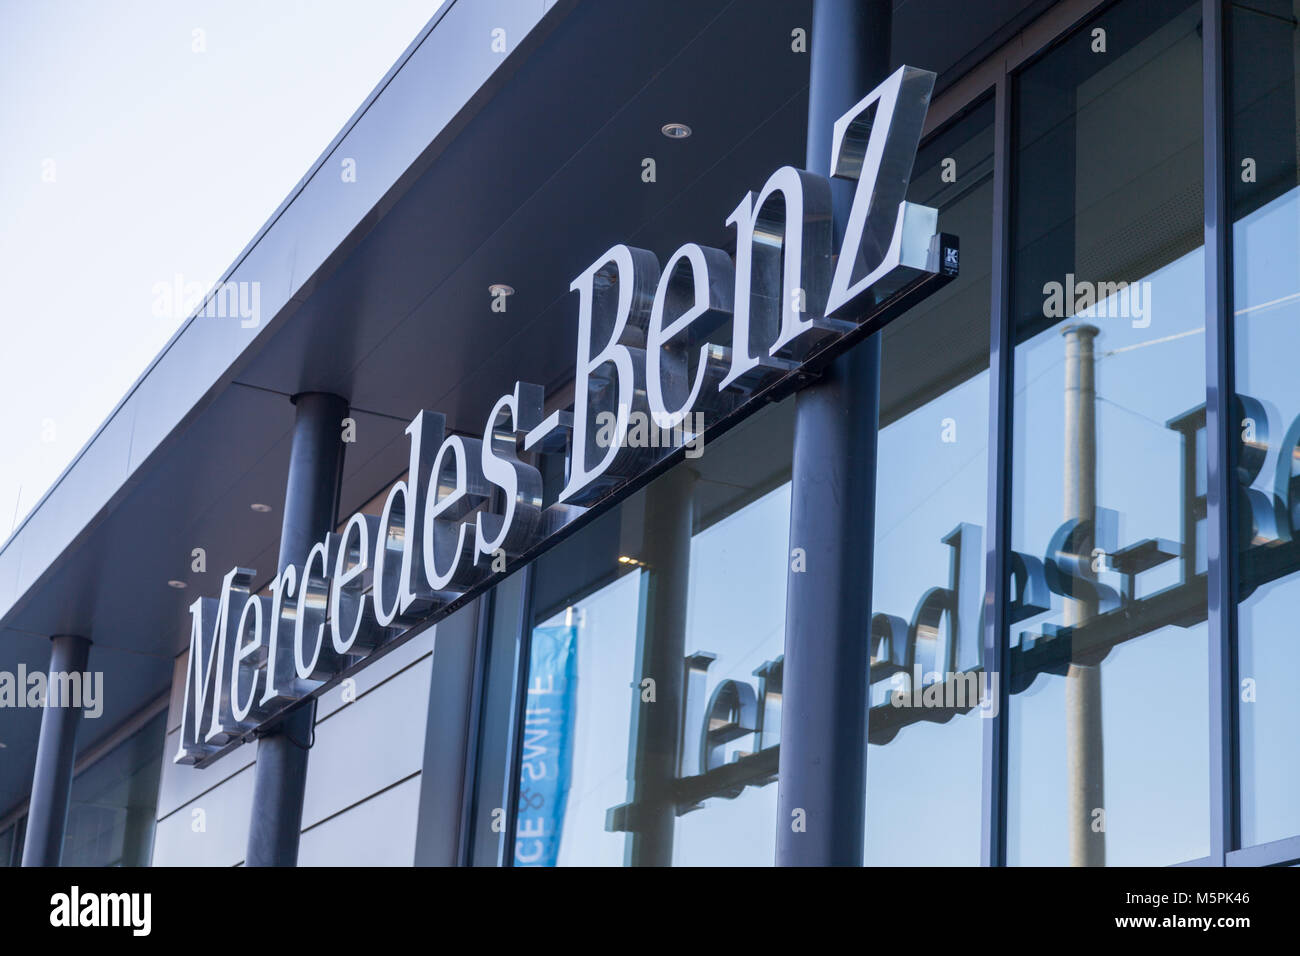 FUERTH / GERMANY - FEBRUARY 25, 2018: Mercedes-Benz logo hangs on a car dealer building. Mercedes-Benz is a global automobile marque and a division of Stock Photo